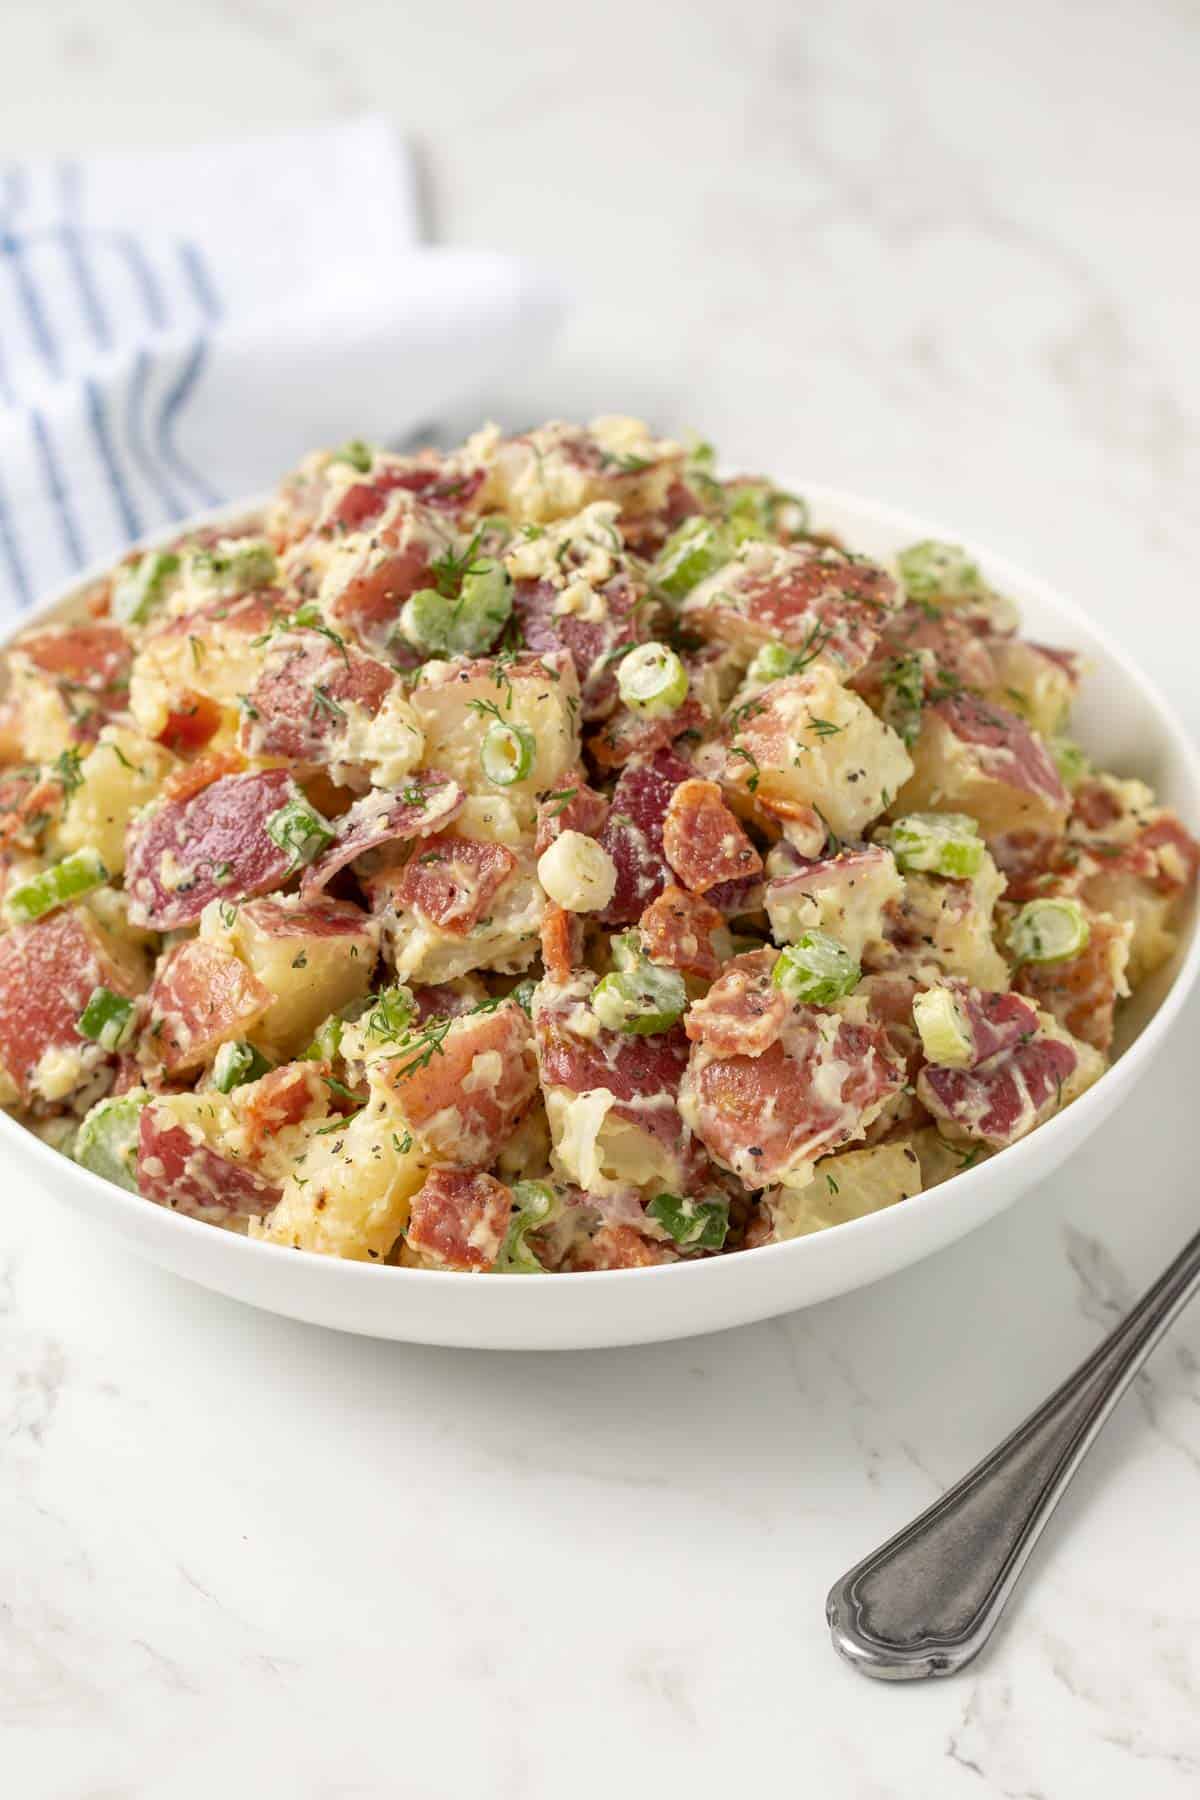 Front view of red potato salad in a white bowl.